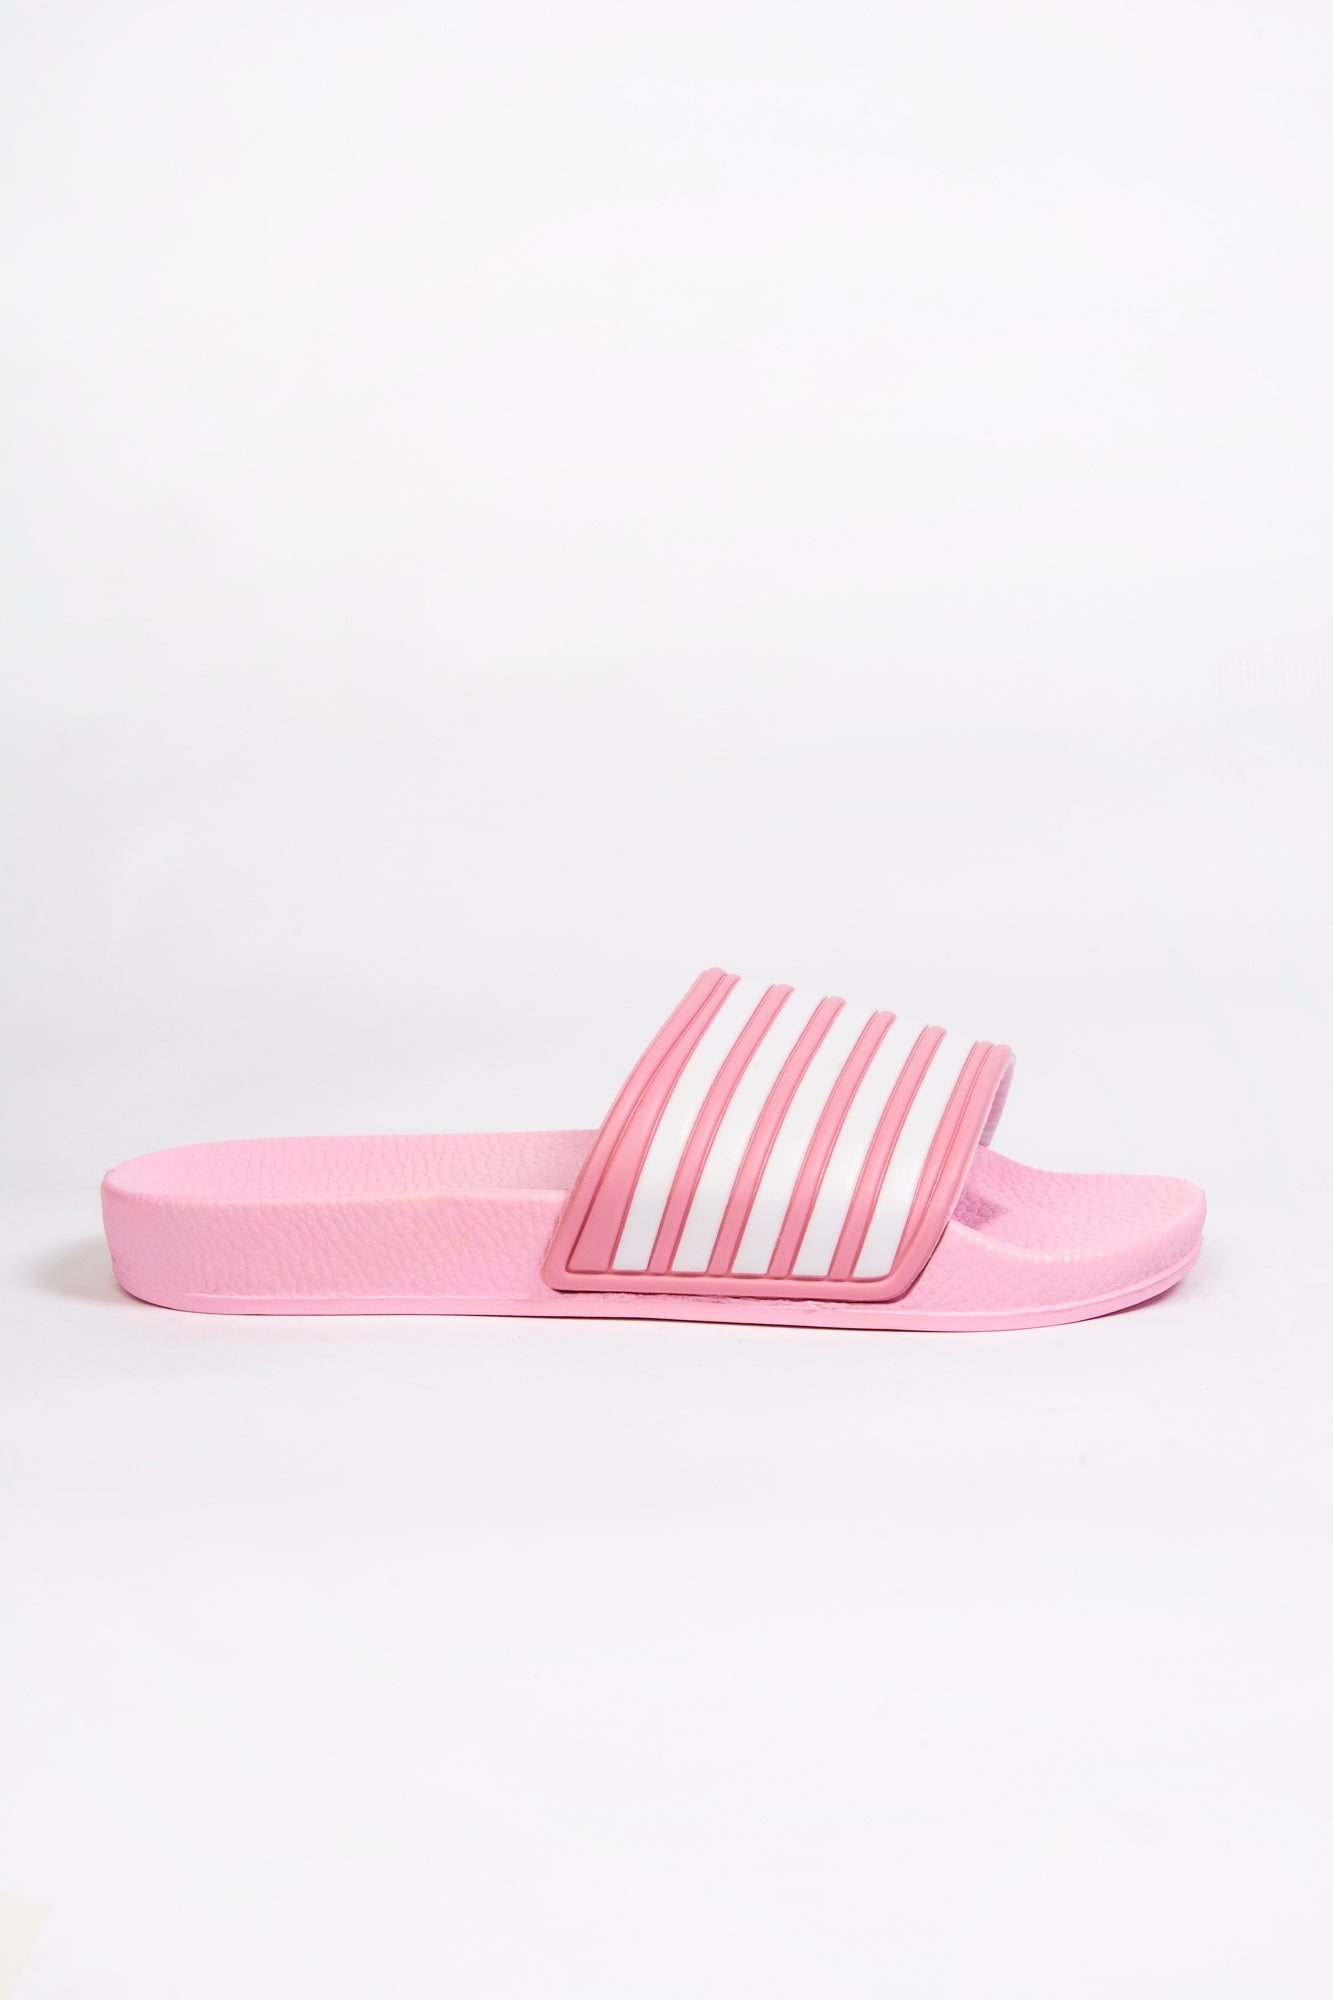 Lisa Youths Pink with White Stripes